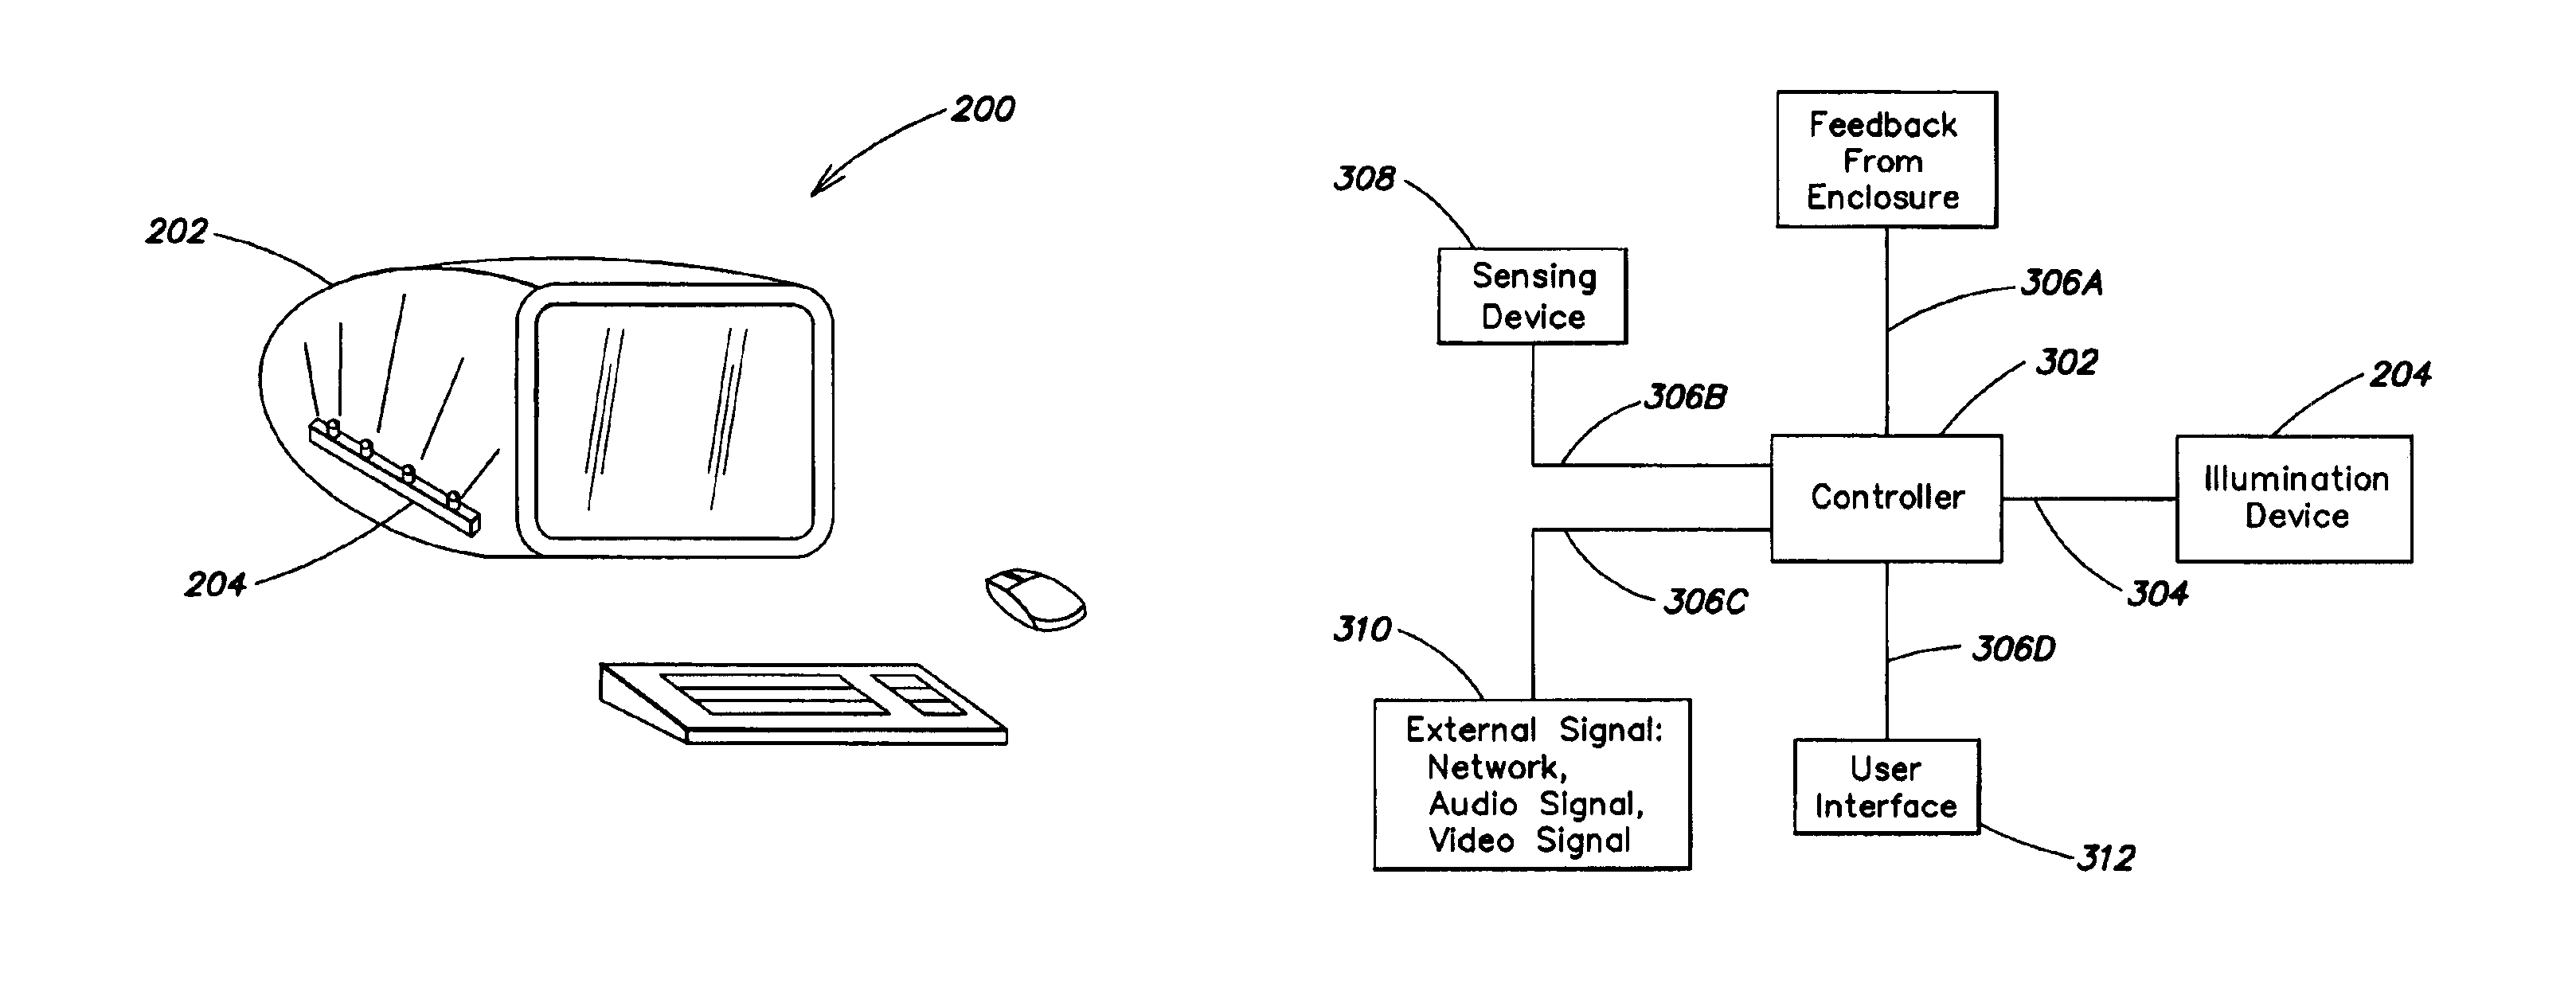 Systems and methods for color changing device and enclosure